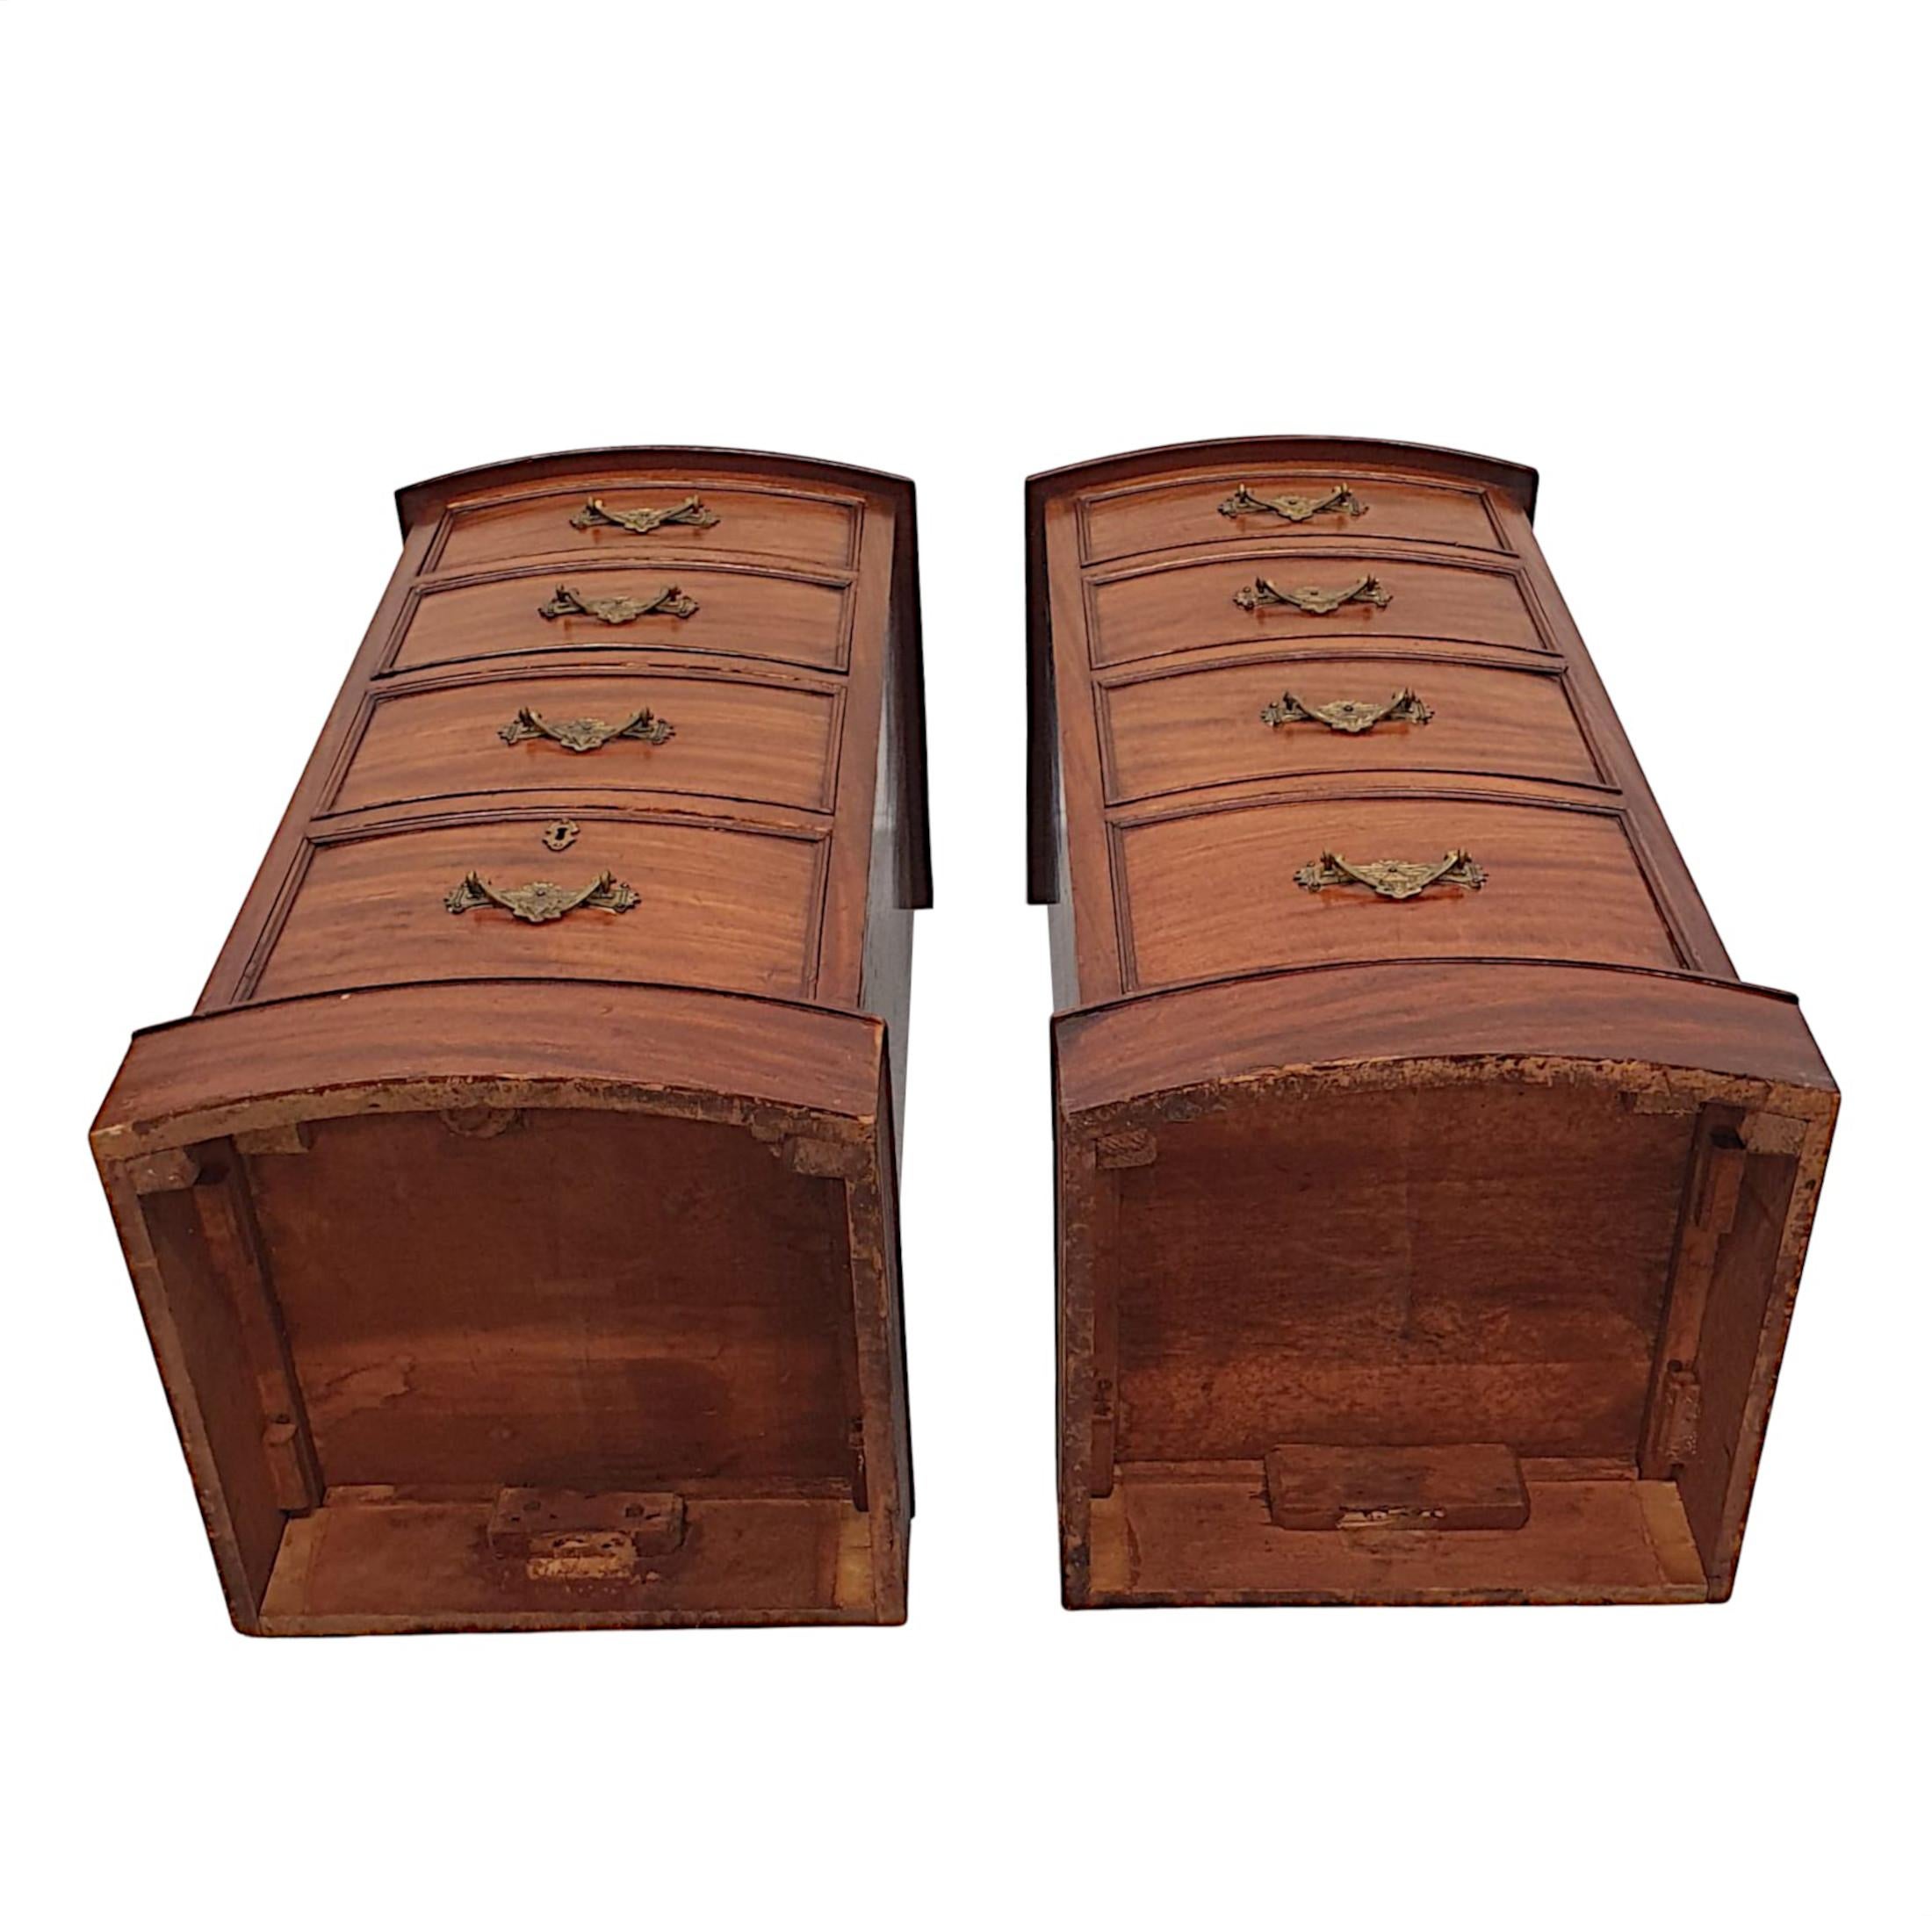 A Very Fine Pair of Large 19th Century Bow Fronted Bedside Chests For Sale 3